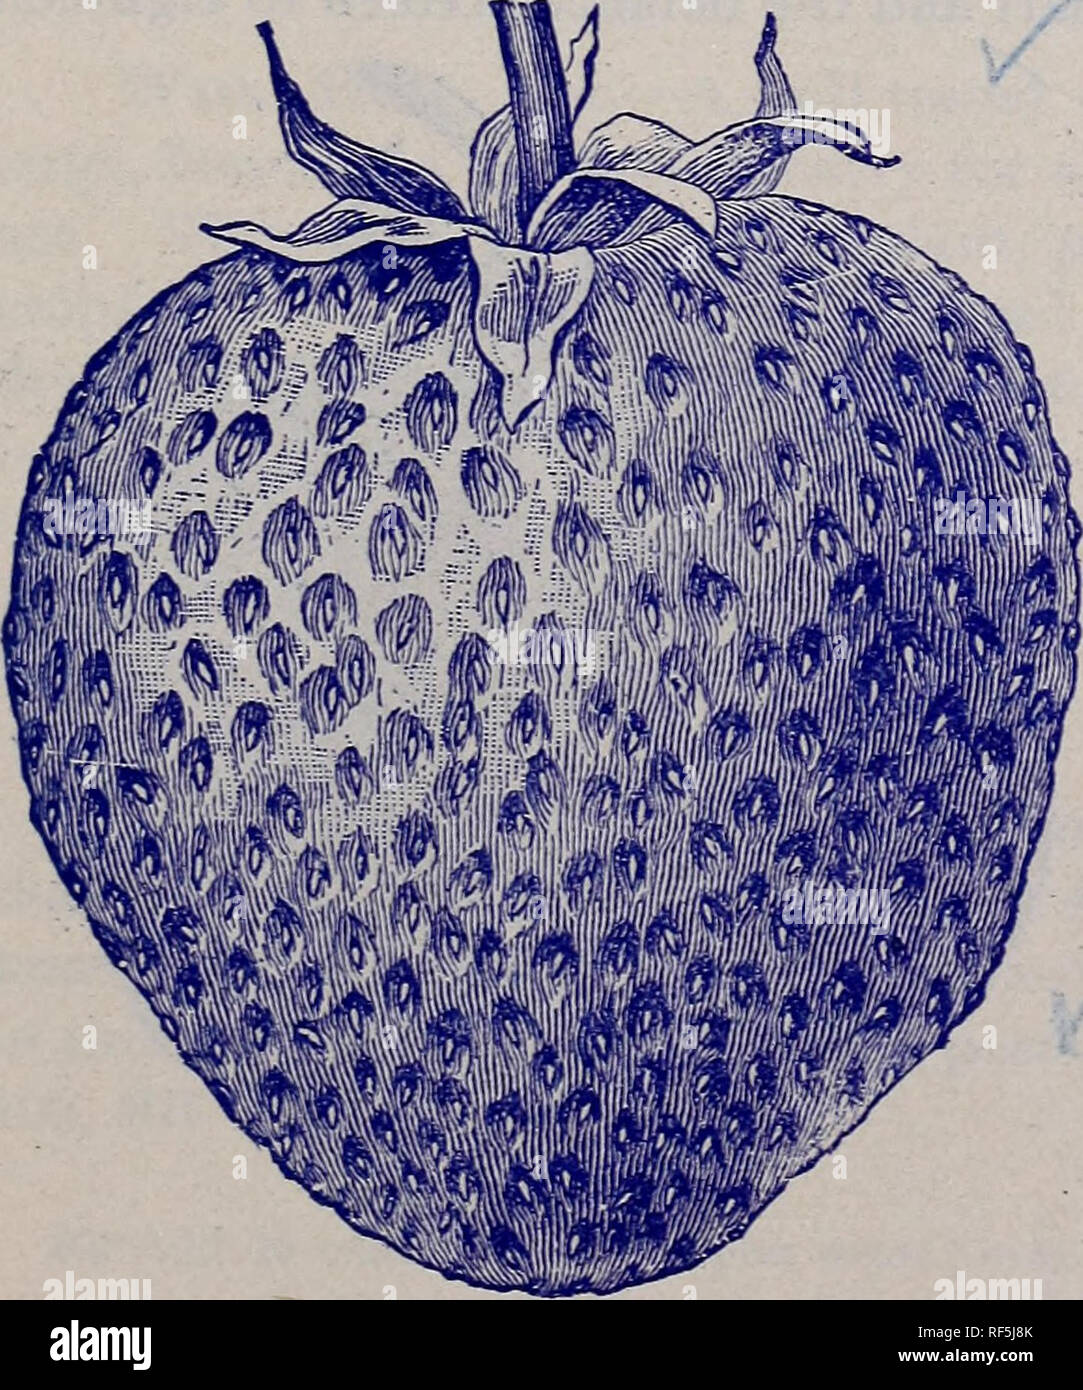 . Descriptive catalogue, free to all, spring of 1902. Nursery stock New York (State) Rochester Catalogs; Fruit Catalogs; Berries Catalogs; Grapes Catalogs. CLYDE. Clyde, Per.—This new berry seems to be gaining great favor wherever known. It originated with Dr. J. Stayman several years ago. It is a seedling of Cyclone, and Cyclone is a cross between Crescent and Cumberland. The Clyde has Crescent blood in it, and no doubt gets its immense productiveness from that variety. With us it is as large as Bubach, nearly or quite a week earlier and very much firmer. The plant is very vigorous and health Stock Photo